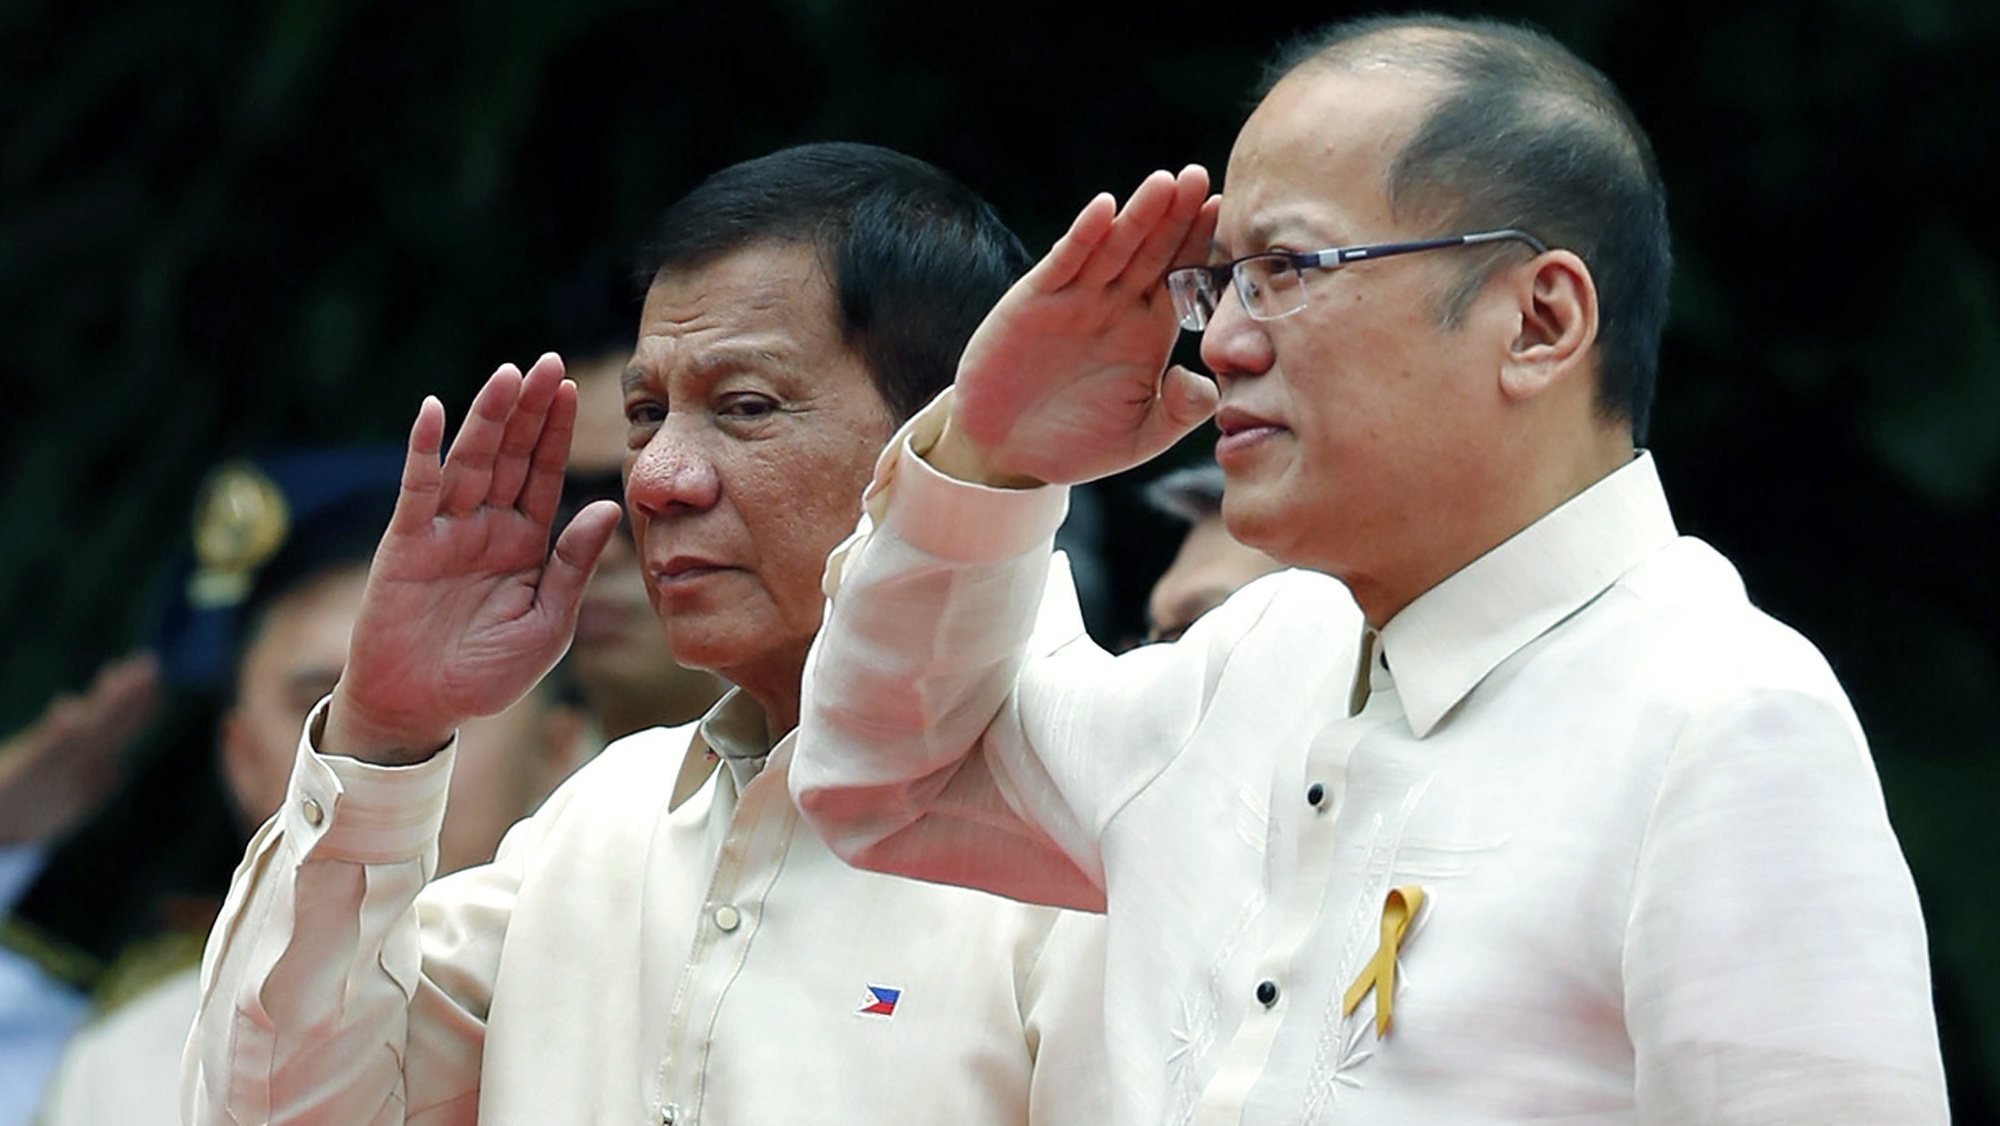 epa09297799 (FILE) - Incoming Filipino President Rodrigo Duterte (L) and outgoing President Benigno Aquino III (R) salute during Duterte&#039;s inauguration ceremony at the Malacanang presidential palace grounds in Manila, Philippines, 30 July 2016 (reissued 24 June 2021). Former president of the Philippines Benigno Aquino III died at the age of 61 on 24 June 2021.  EPA/FRANCIS R. MALASIG